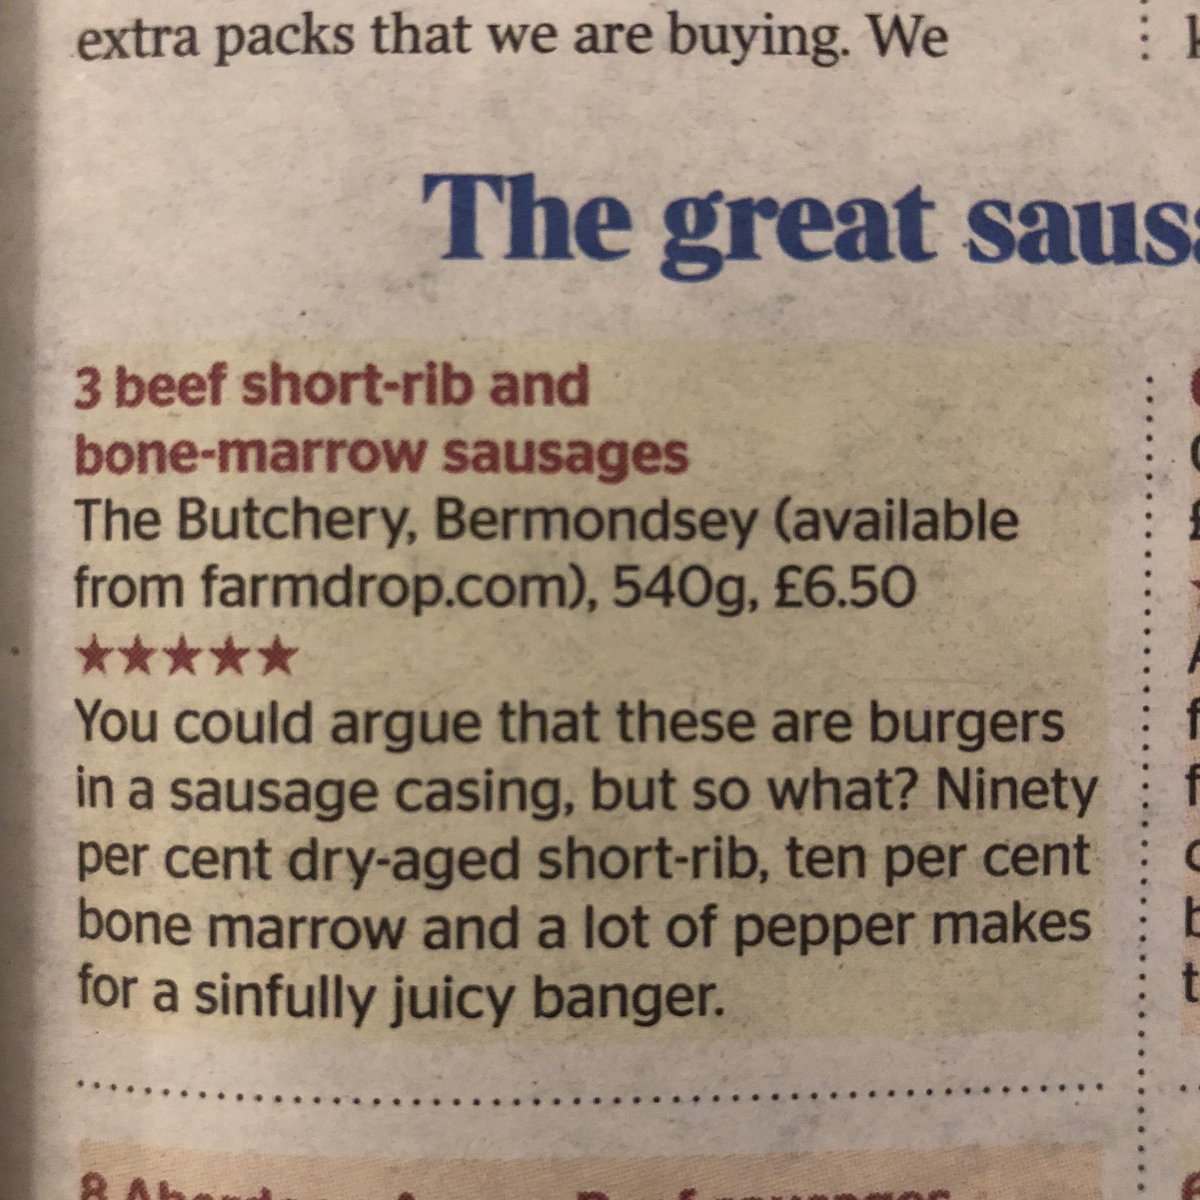 Our dry-aged beef & bone marrow sausages are in @thetimes with a lovely 5 ⭐️and already sold out at the shop! More in next week folks.